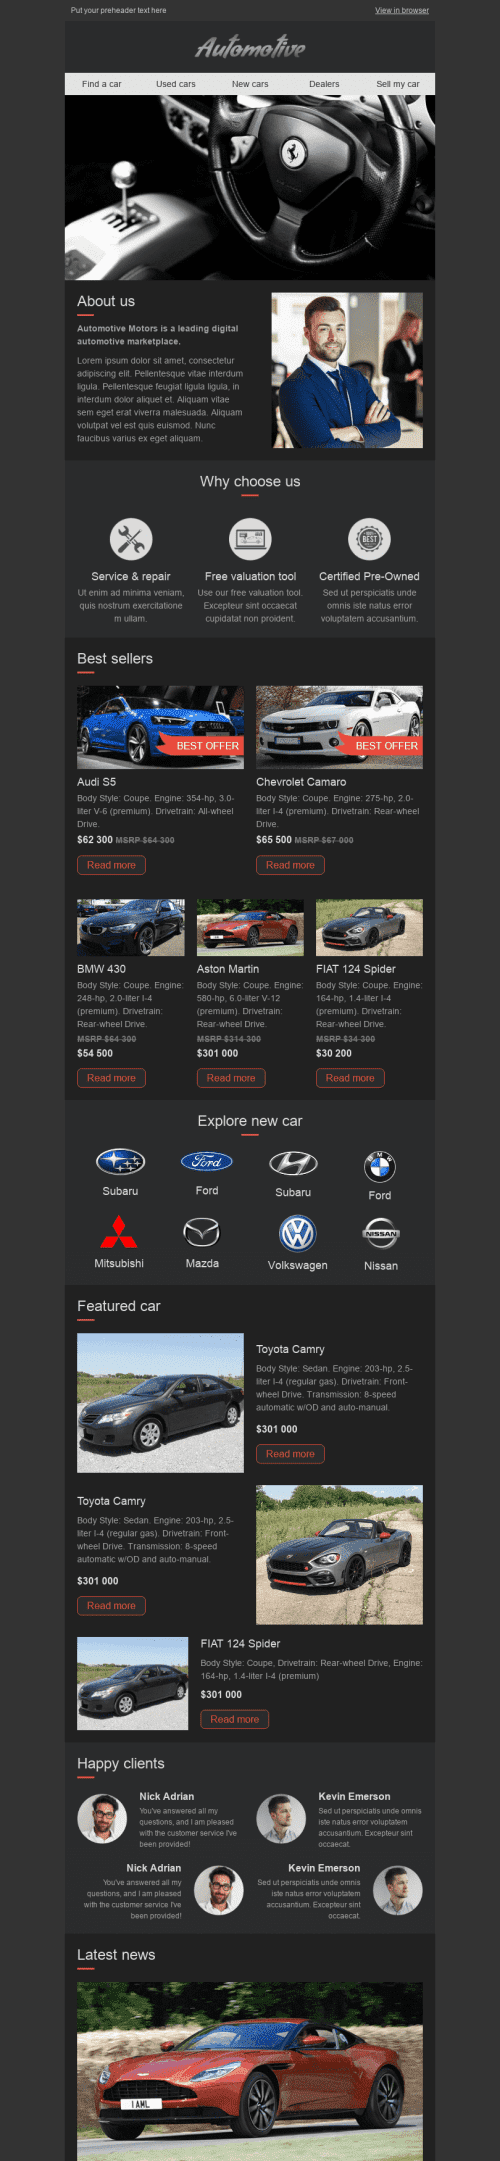 Promo Email Template "Online Shop" for Auto & Moto industry desktop view